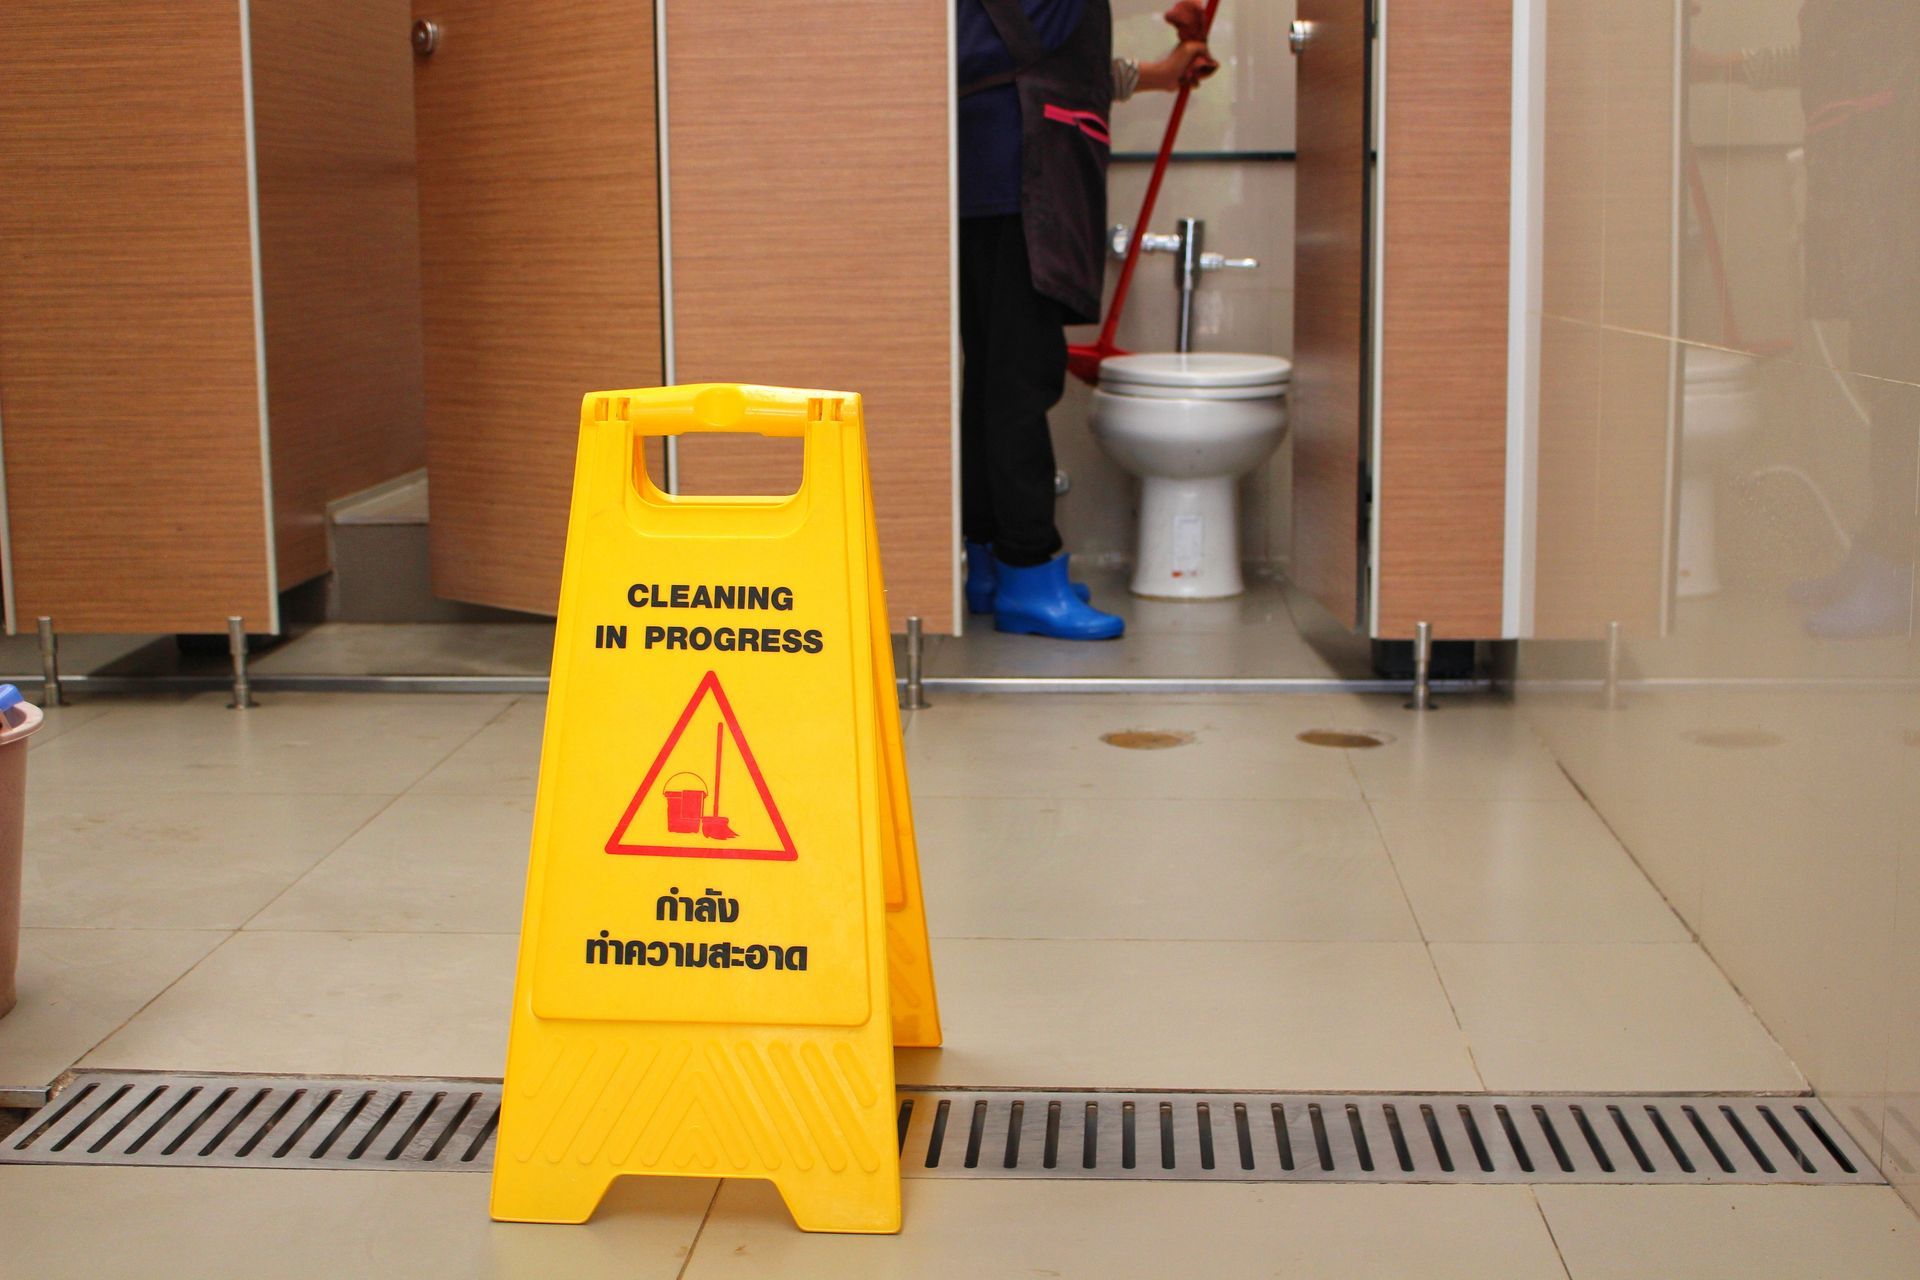 Someone cleaning the toilets in the bathroom of an office building. A cleaning in profess sign is on display to warn guests.